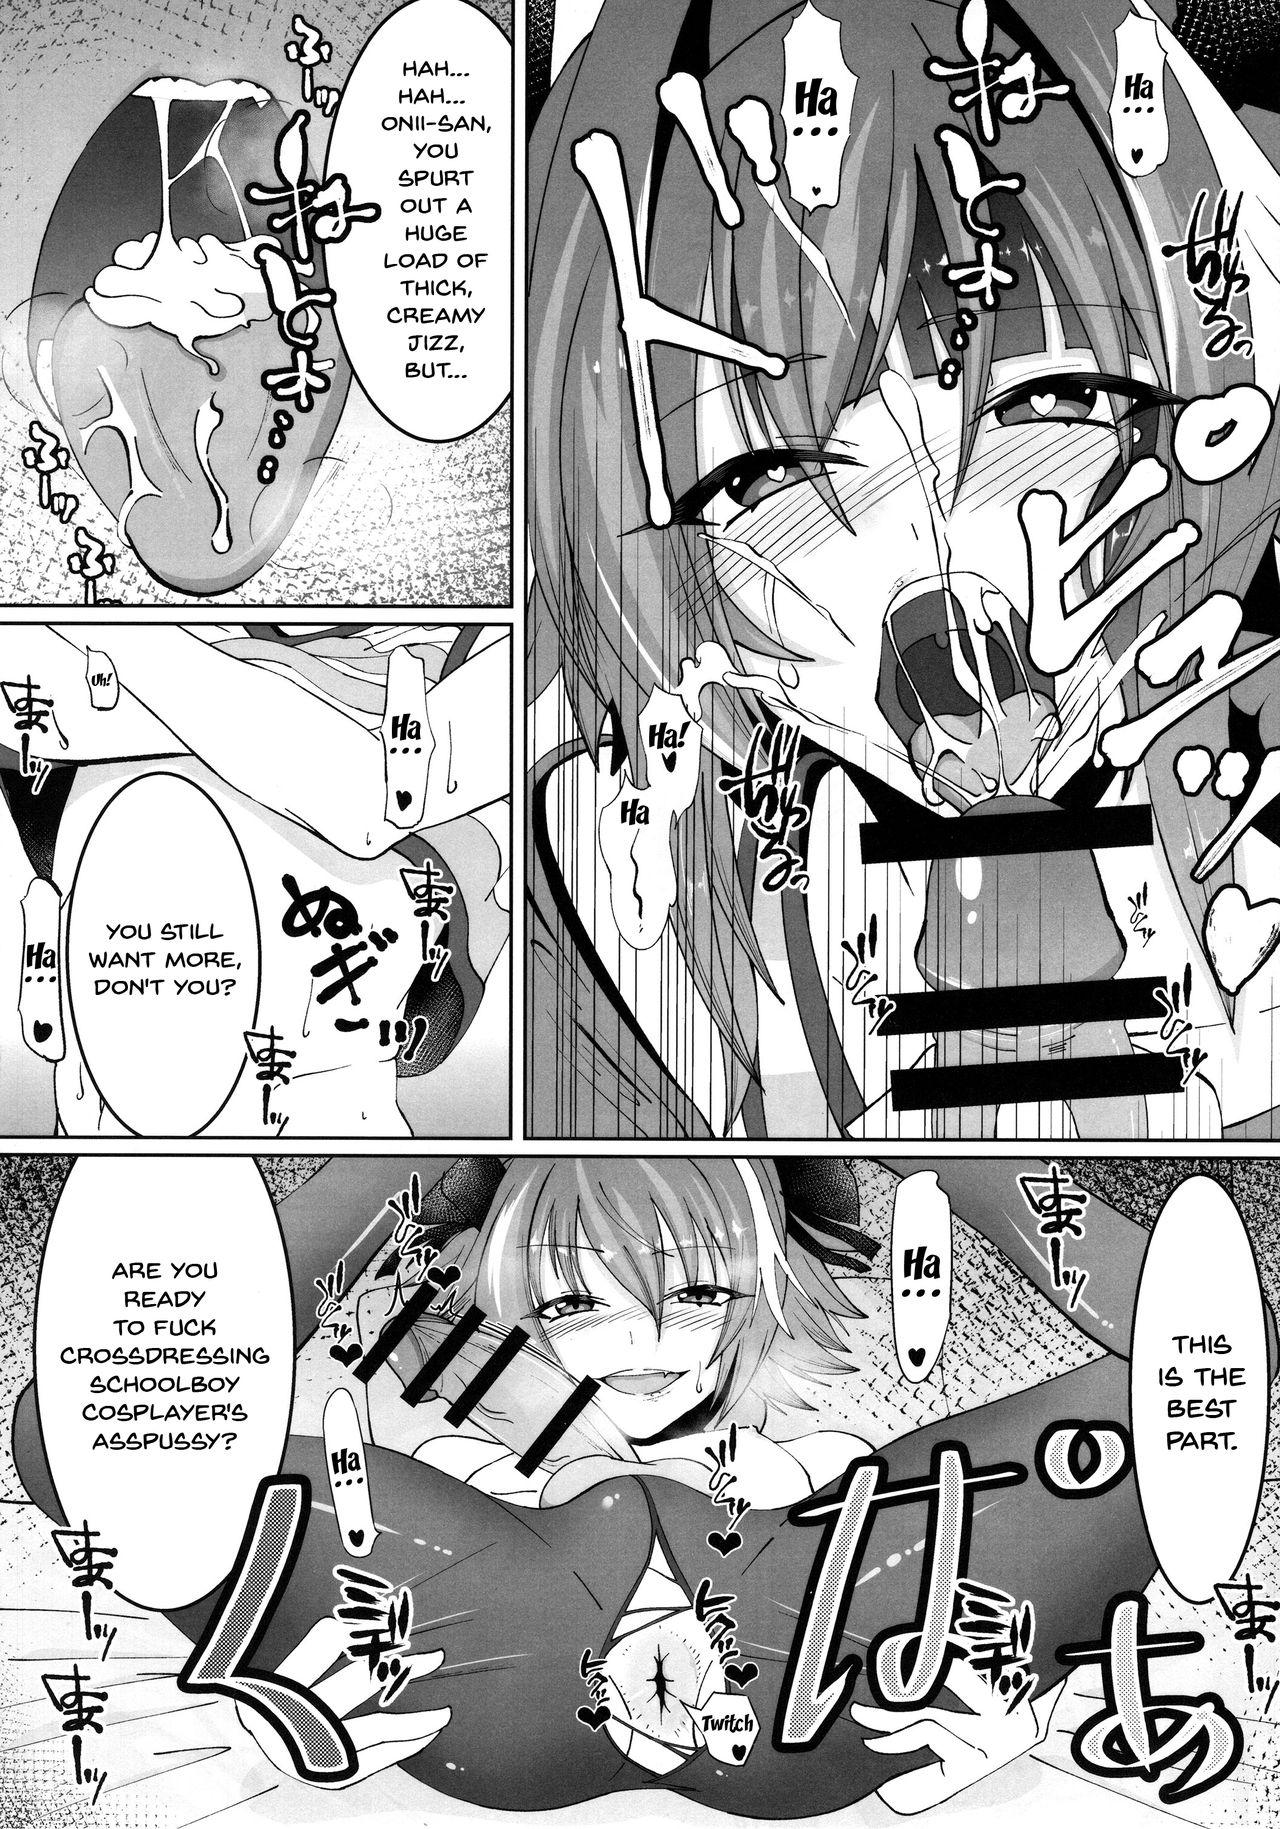 Gaycum Deal With The Devil - Fate grand order Free Rough Porn - Page 9